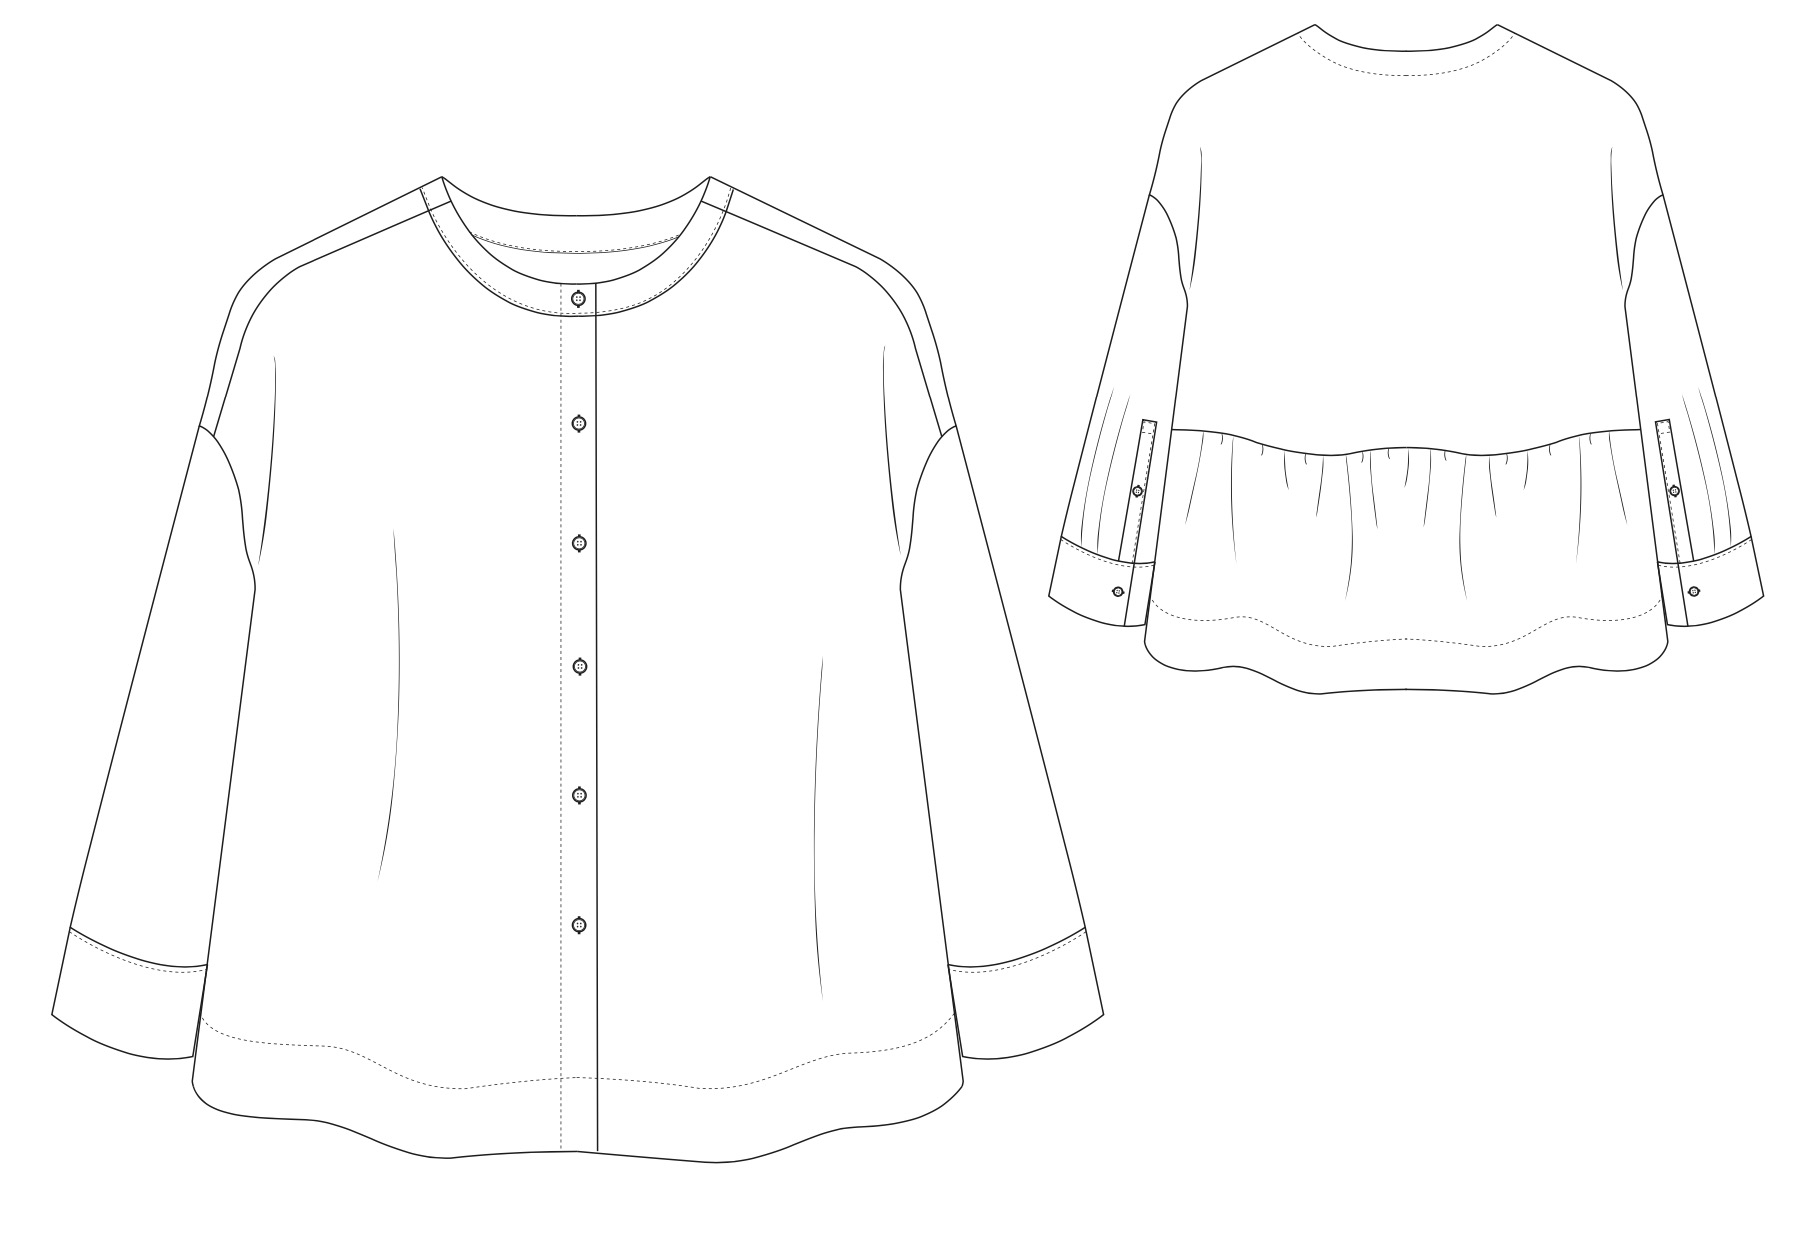 The Modern Sewing Co. Leila Shirt - The Fold Line